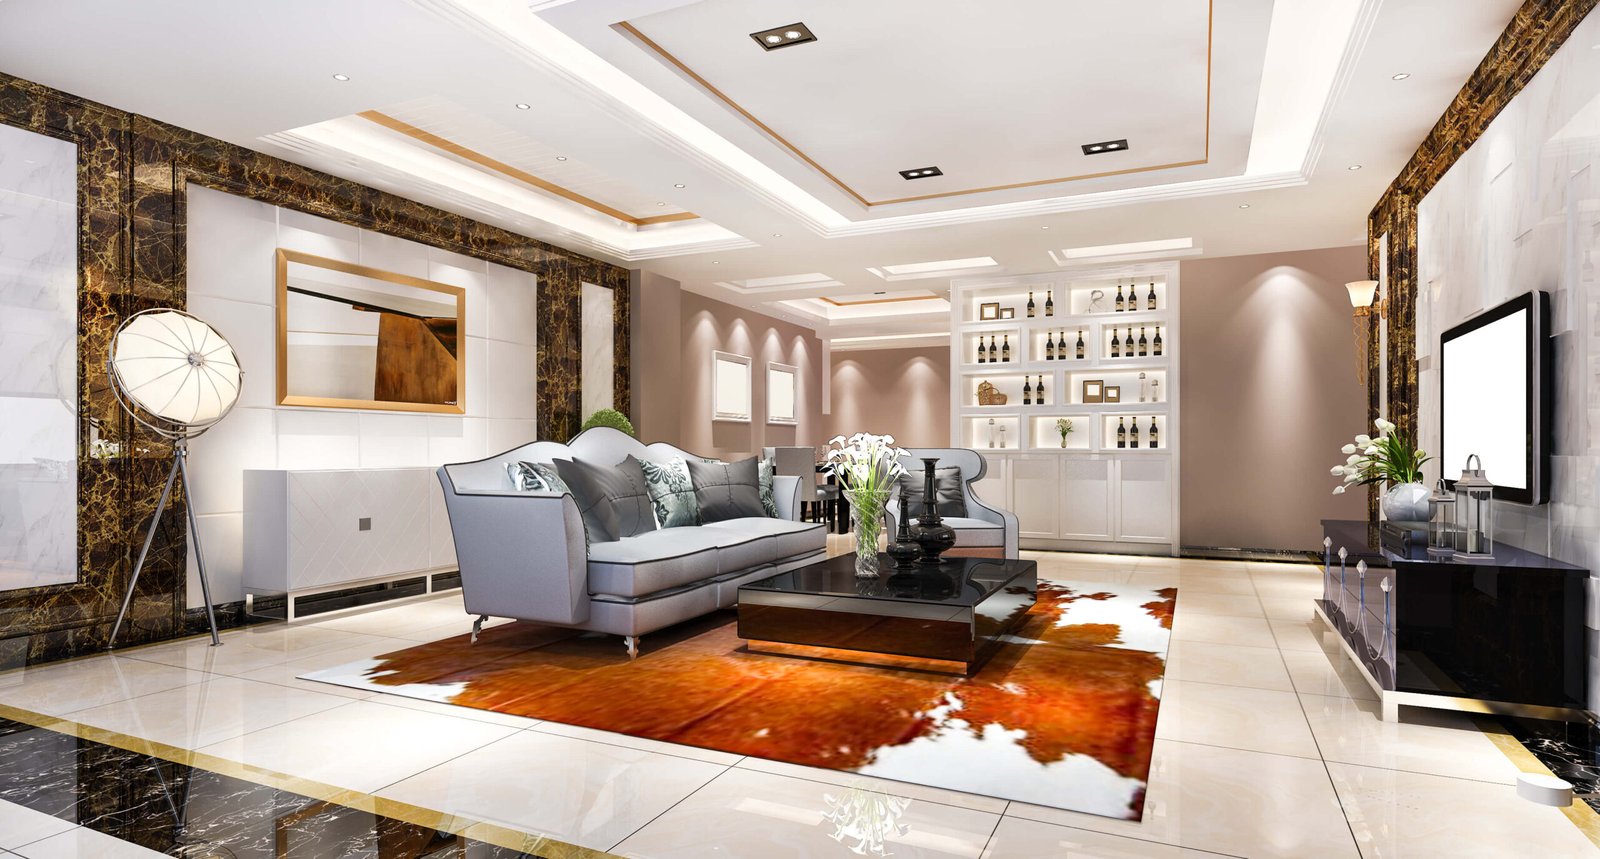 Luxury Apartments for Sale: Experience Unmatched Elegance and Comfort